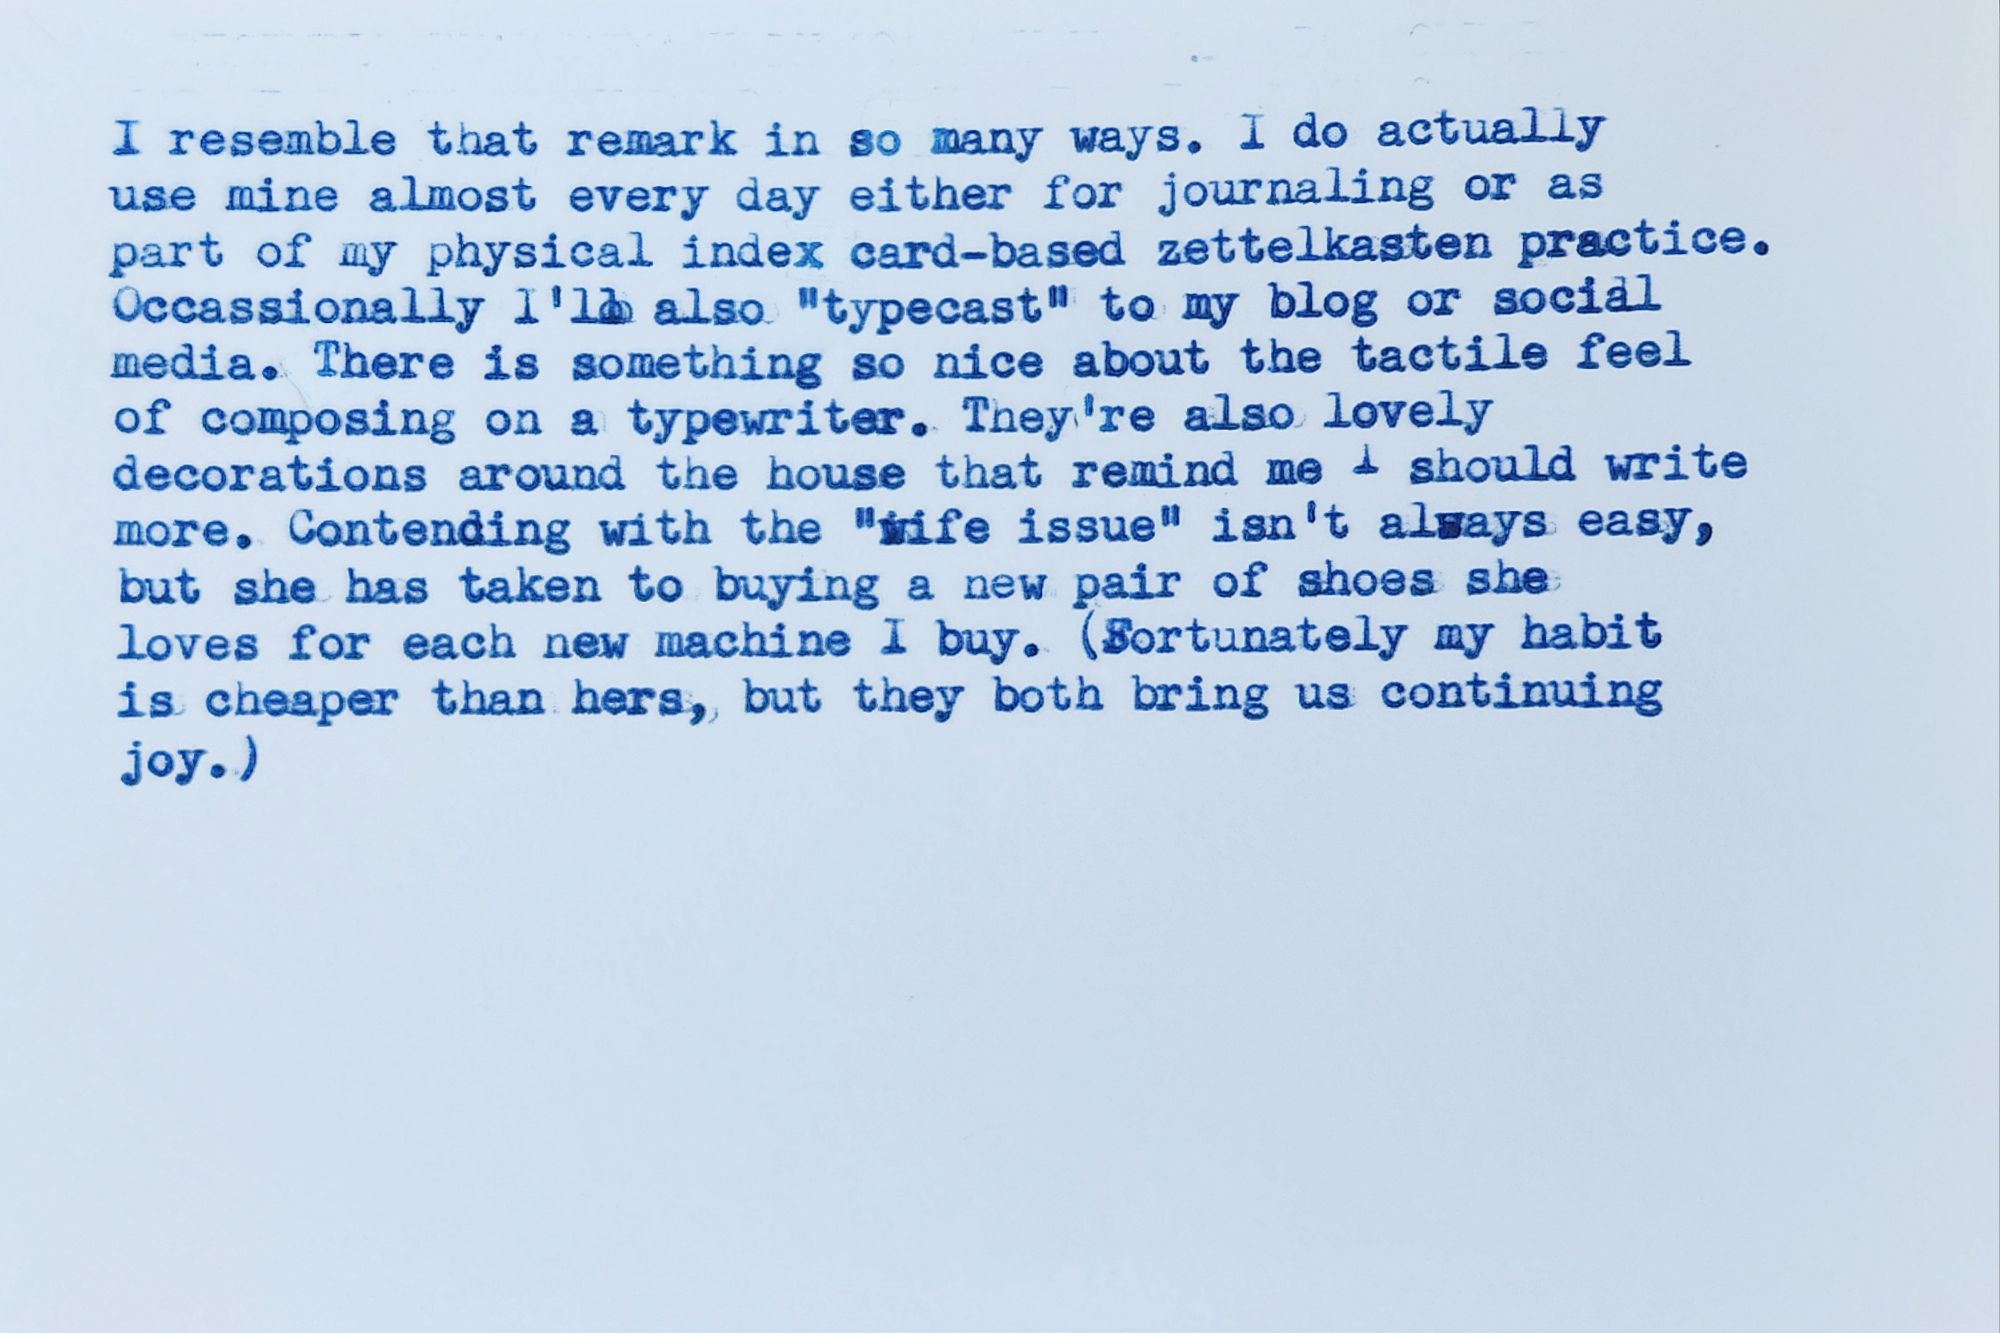 Blank typewritten index card in blue ink that reads:
I resemble that remark in so many ways. I do actually use mine almost every day either for journaling or as part of my physical index card-based zettelkasten practice. Occasionally I'll also "typecast" to my blog or social media. There is something so nice about the tactile feel of composing on a typewriter. They're also lovely decorations around the house that remind me should write more. Contending with the "wife issue" isn't always easy, but she has taken to buying a new pair of shoes she loves for each new machine I buy. (Fortunately my habit is cheaper than hers, but they both bring us continuing joy.)